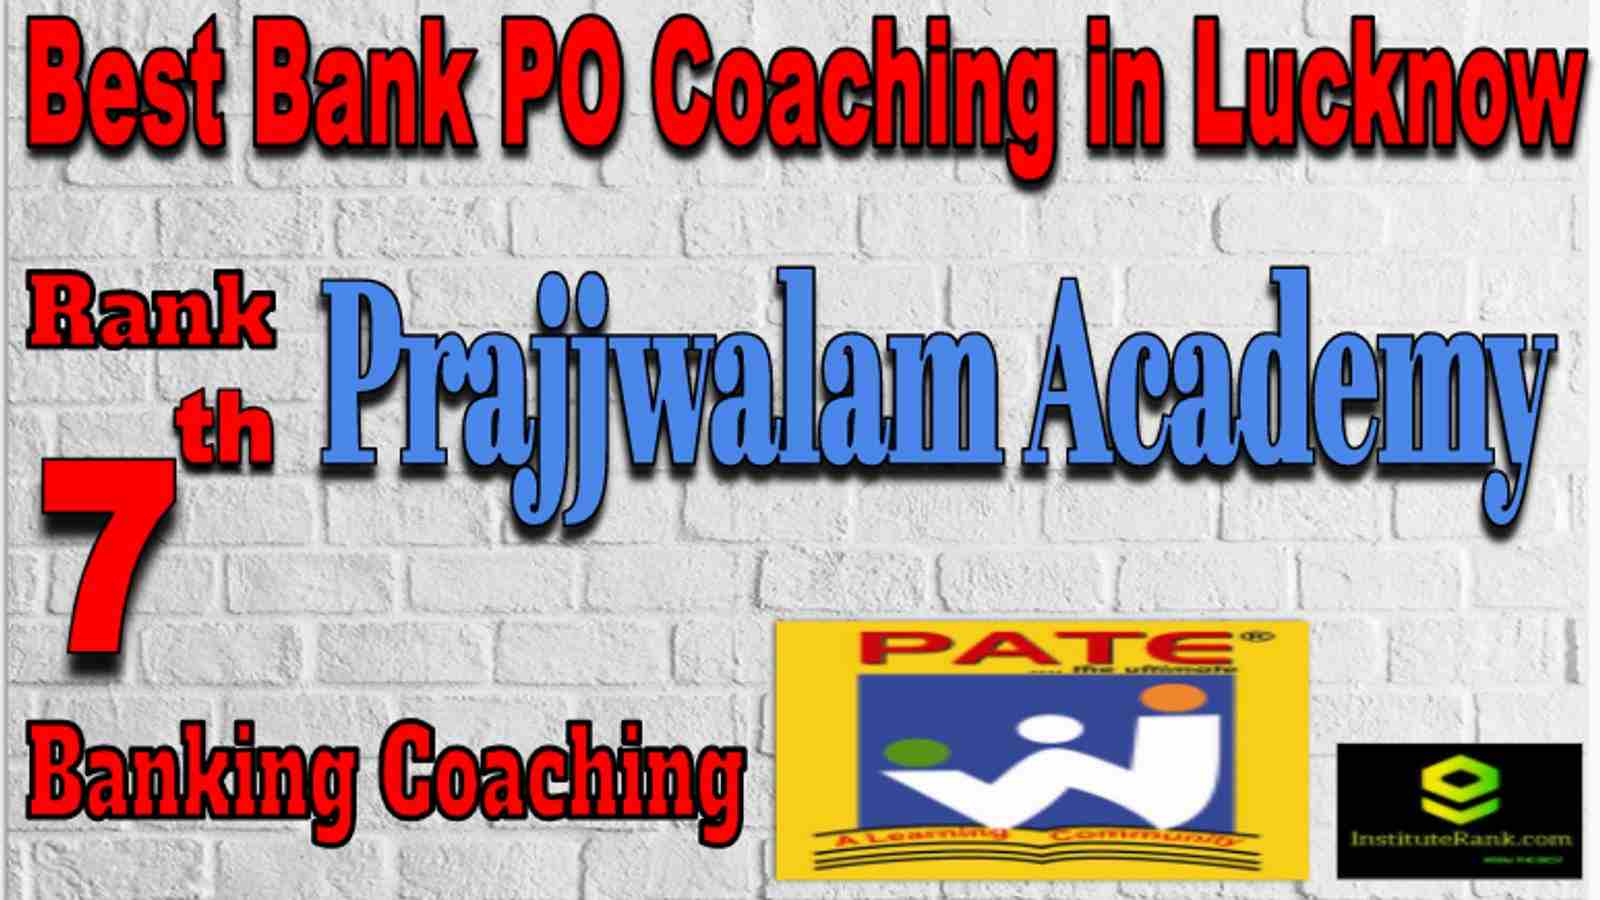 Rank 7 Best Banking PO Coaching in Lucknow